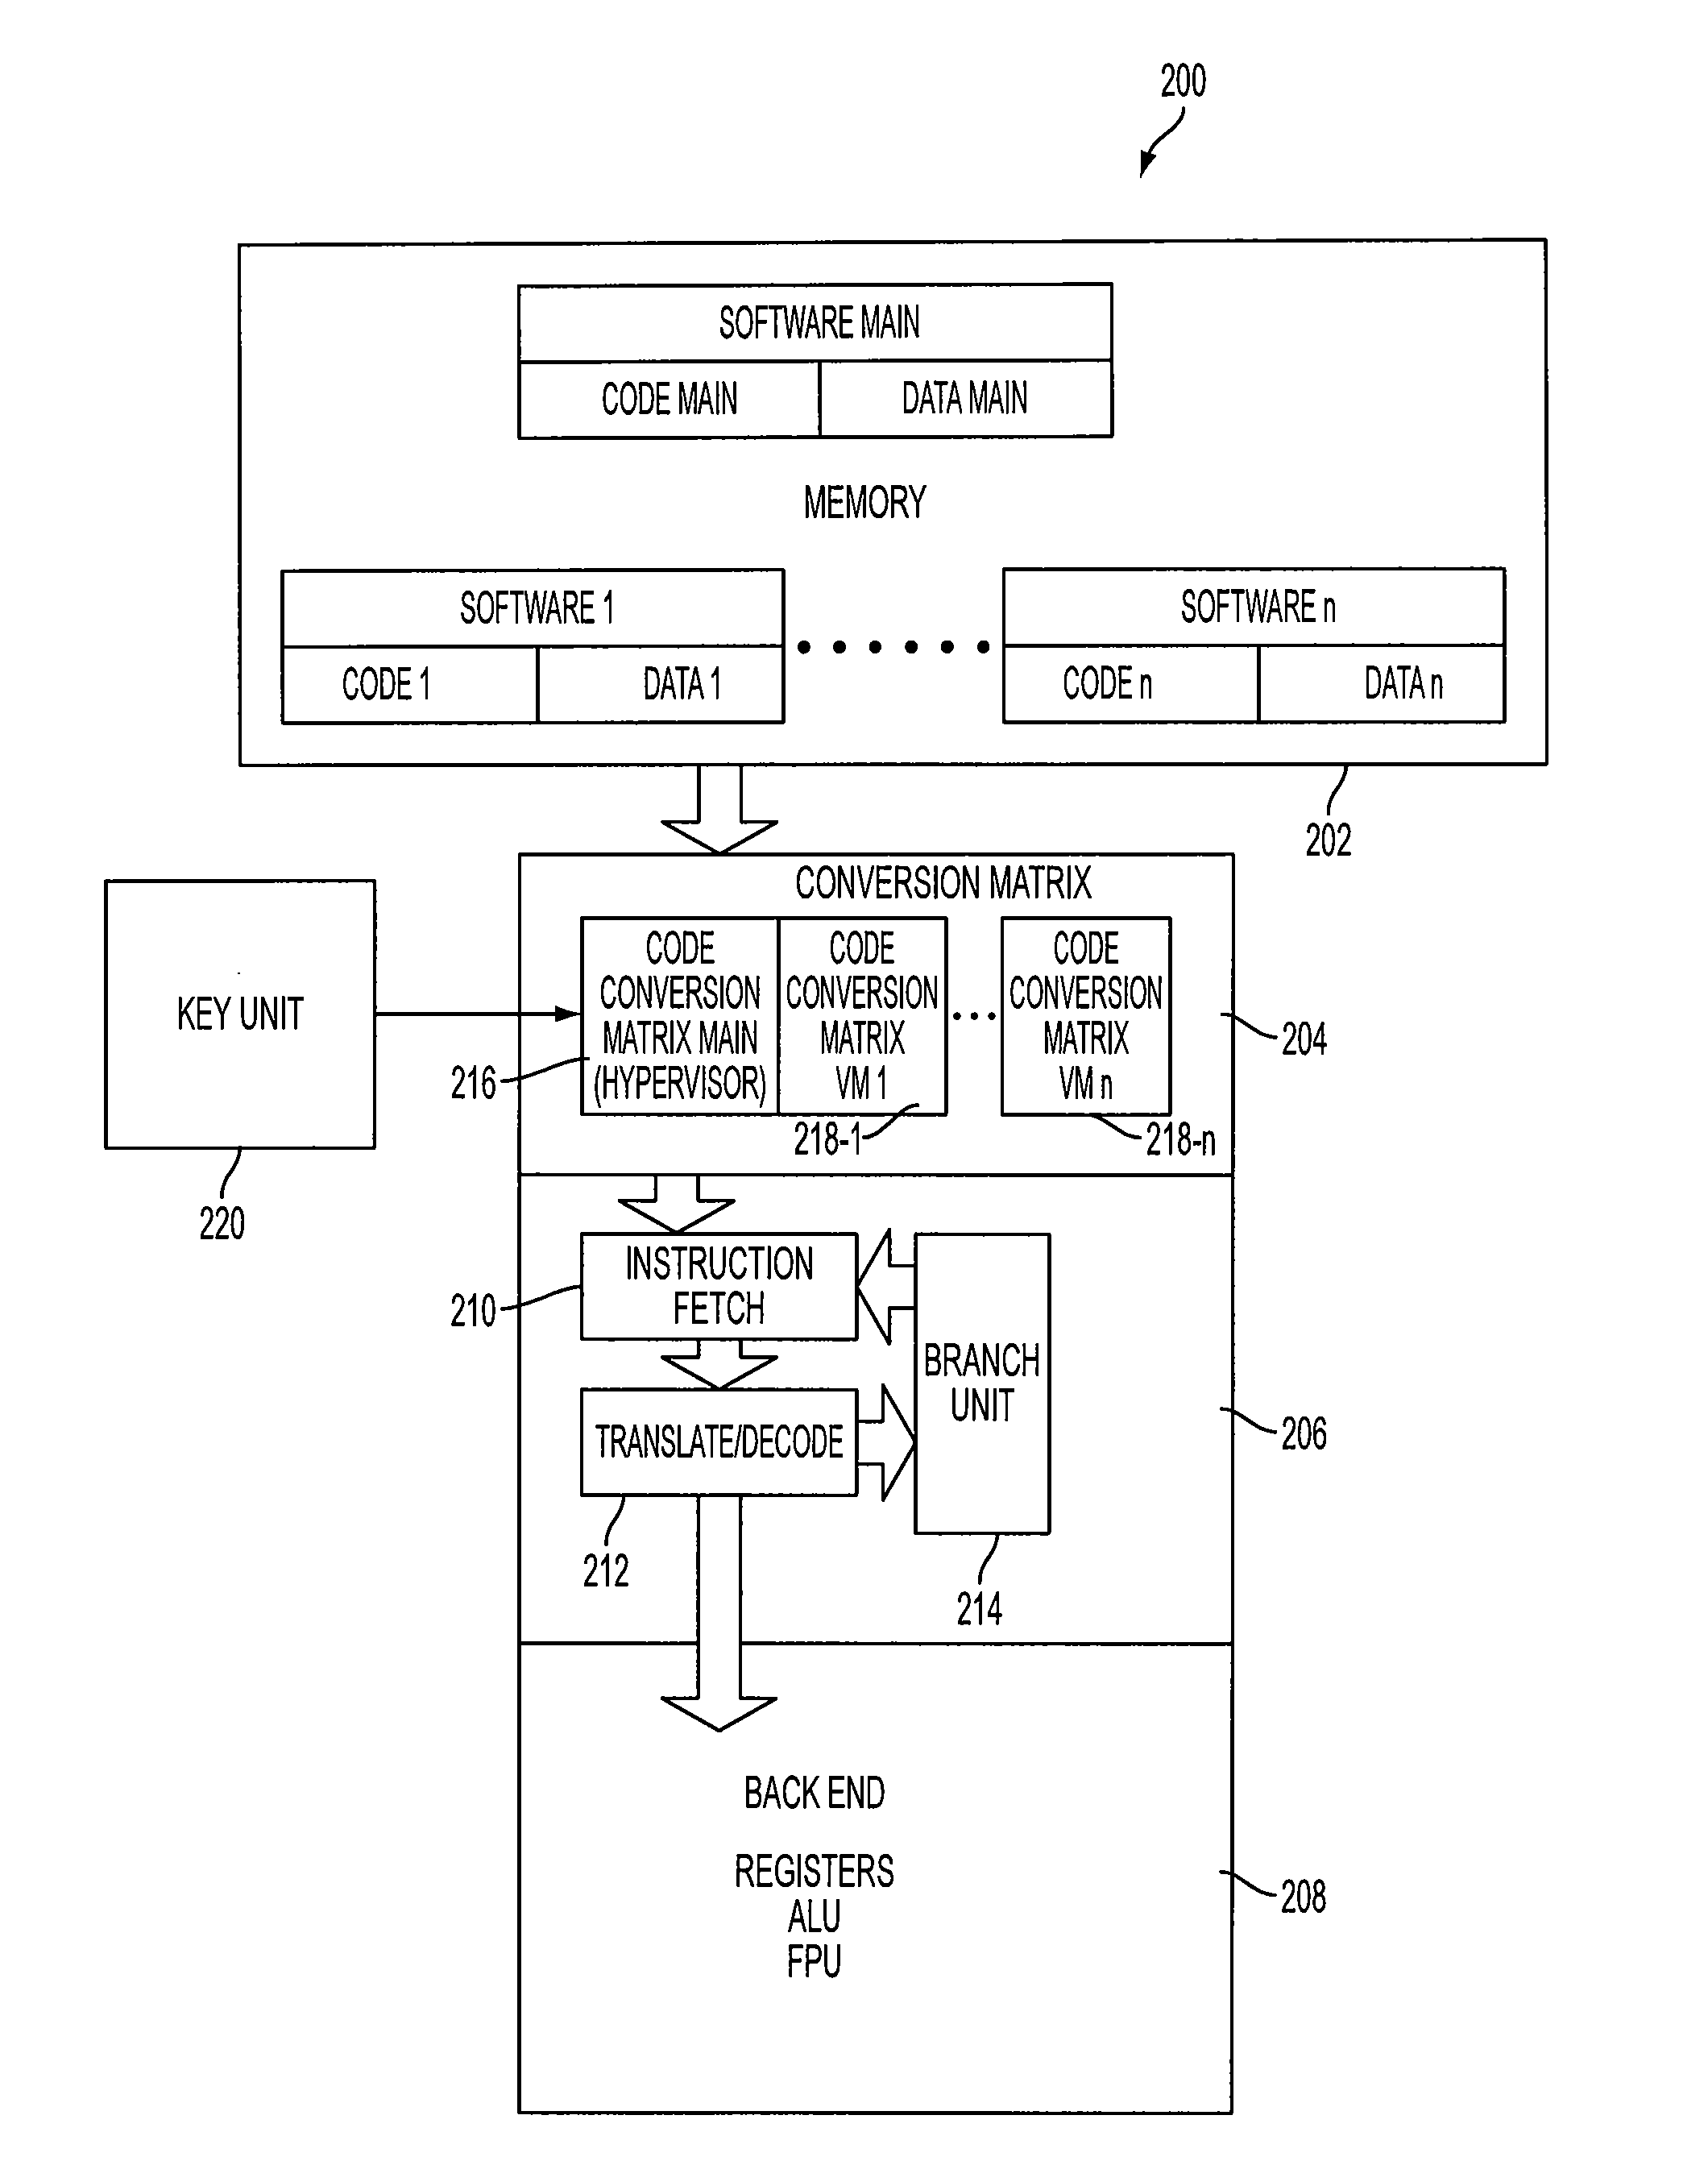 Computing device configured for operating with instructions in unique code